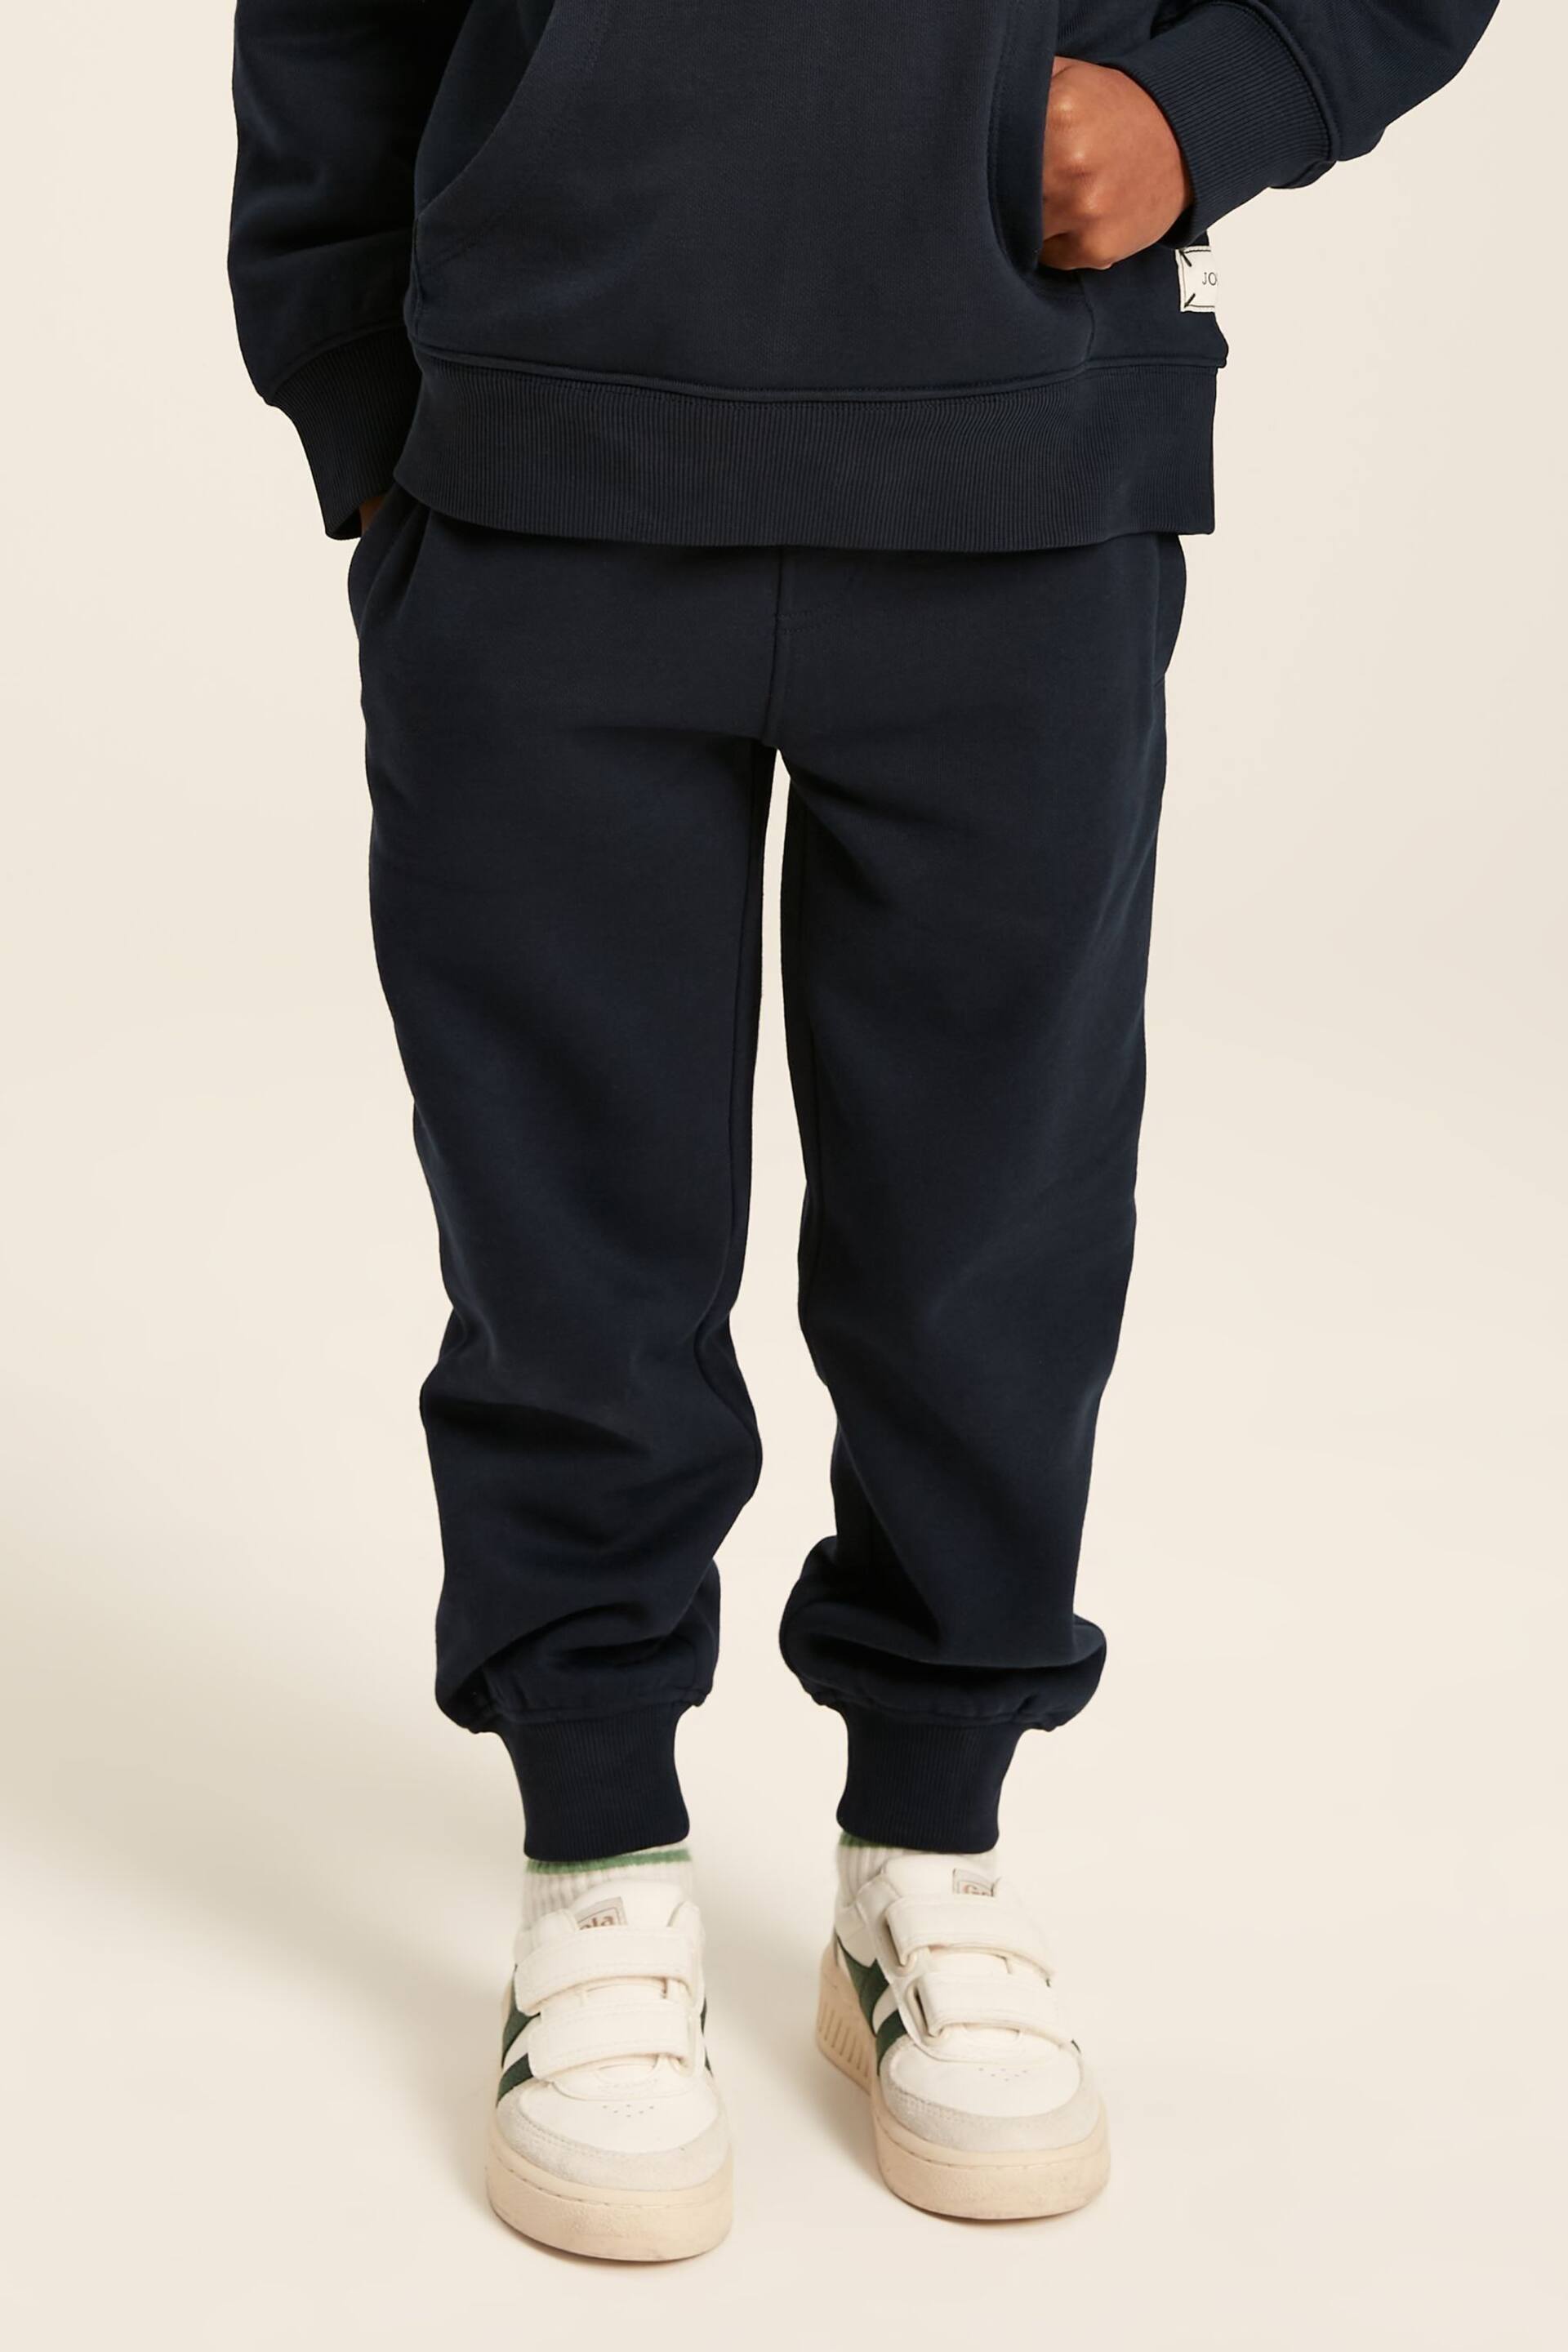 Joules Ted Navy Blue Jersey Joggers - Image 1 of 10